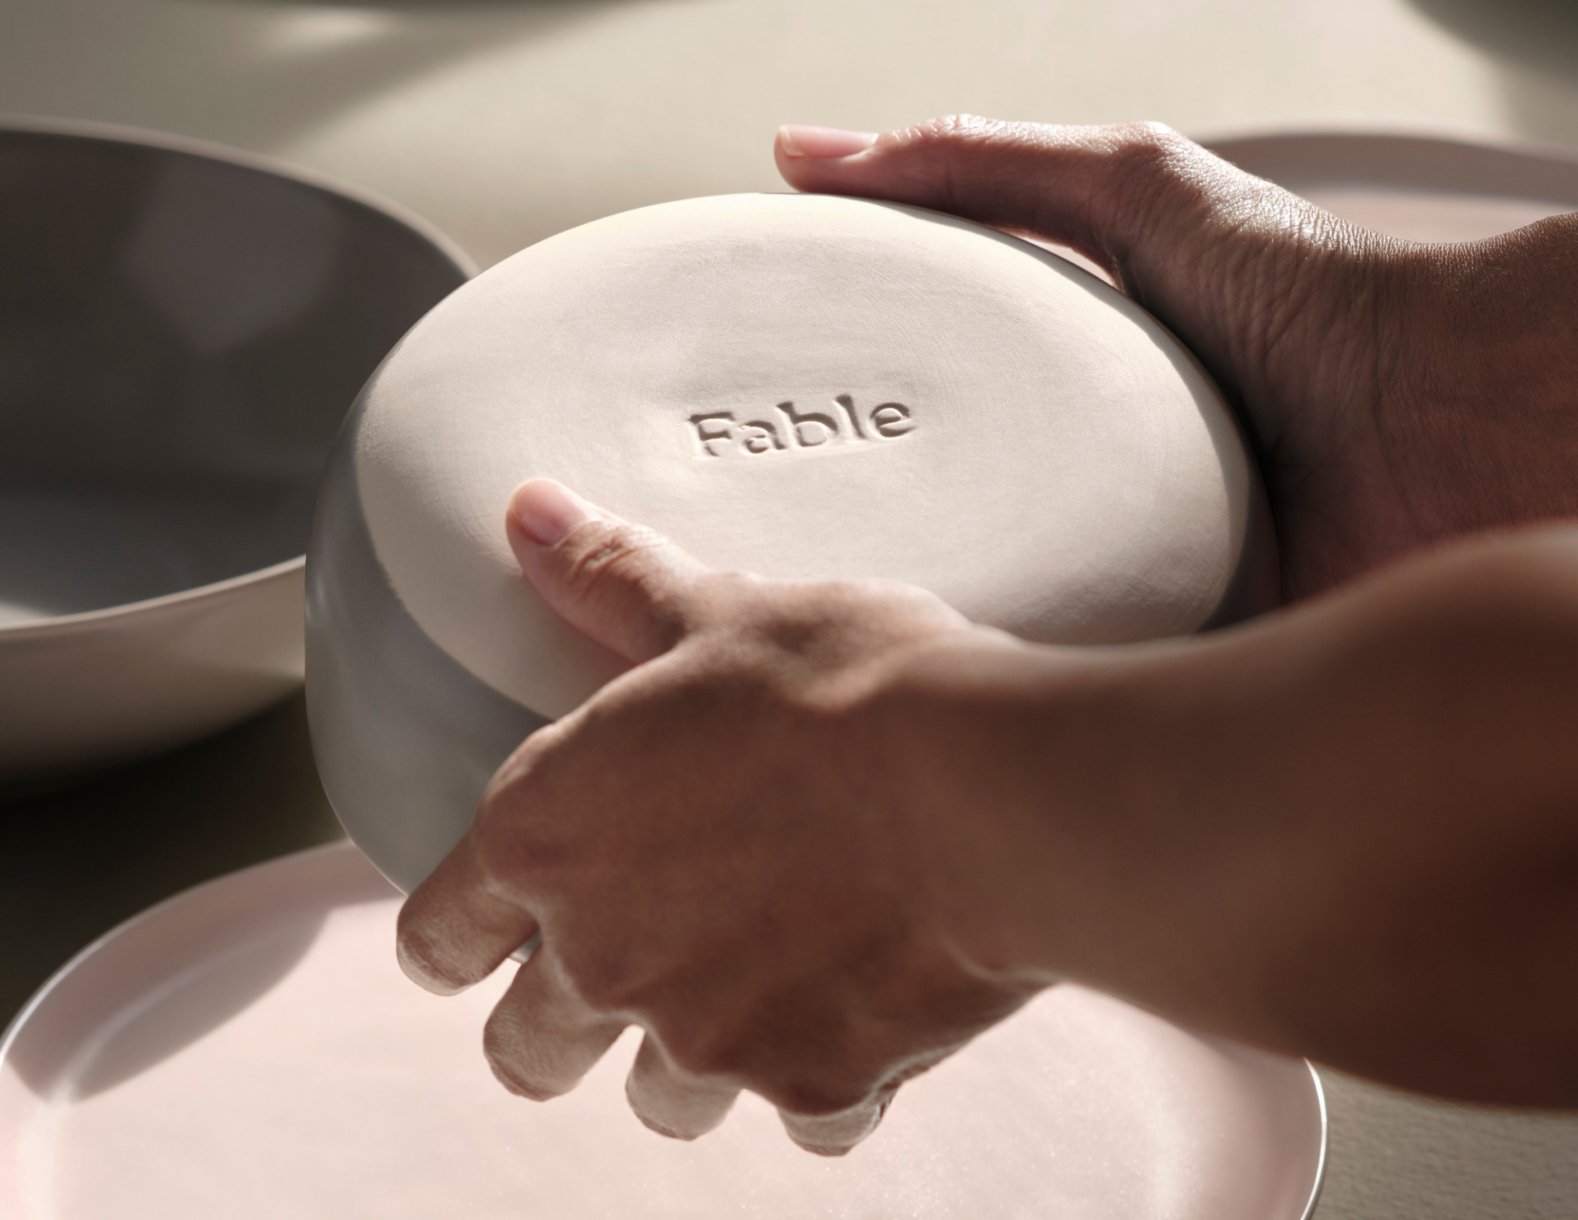 Load video: Promotional video showing how Fable ceramics are crafted.